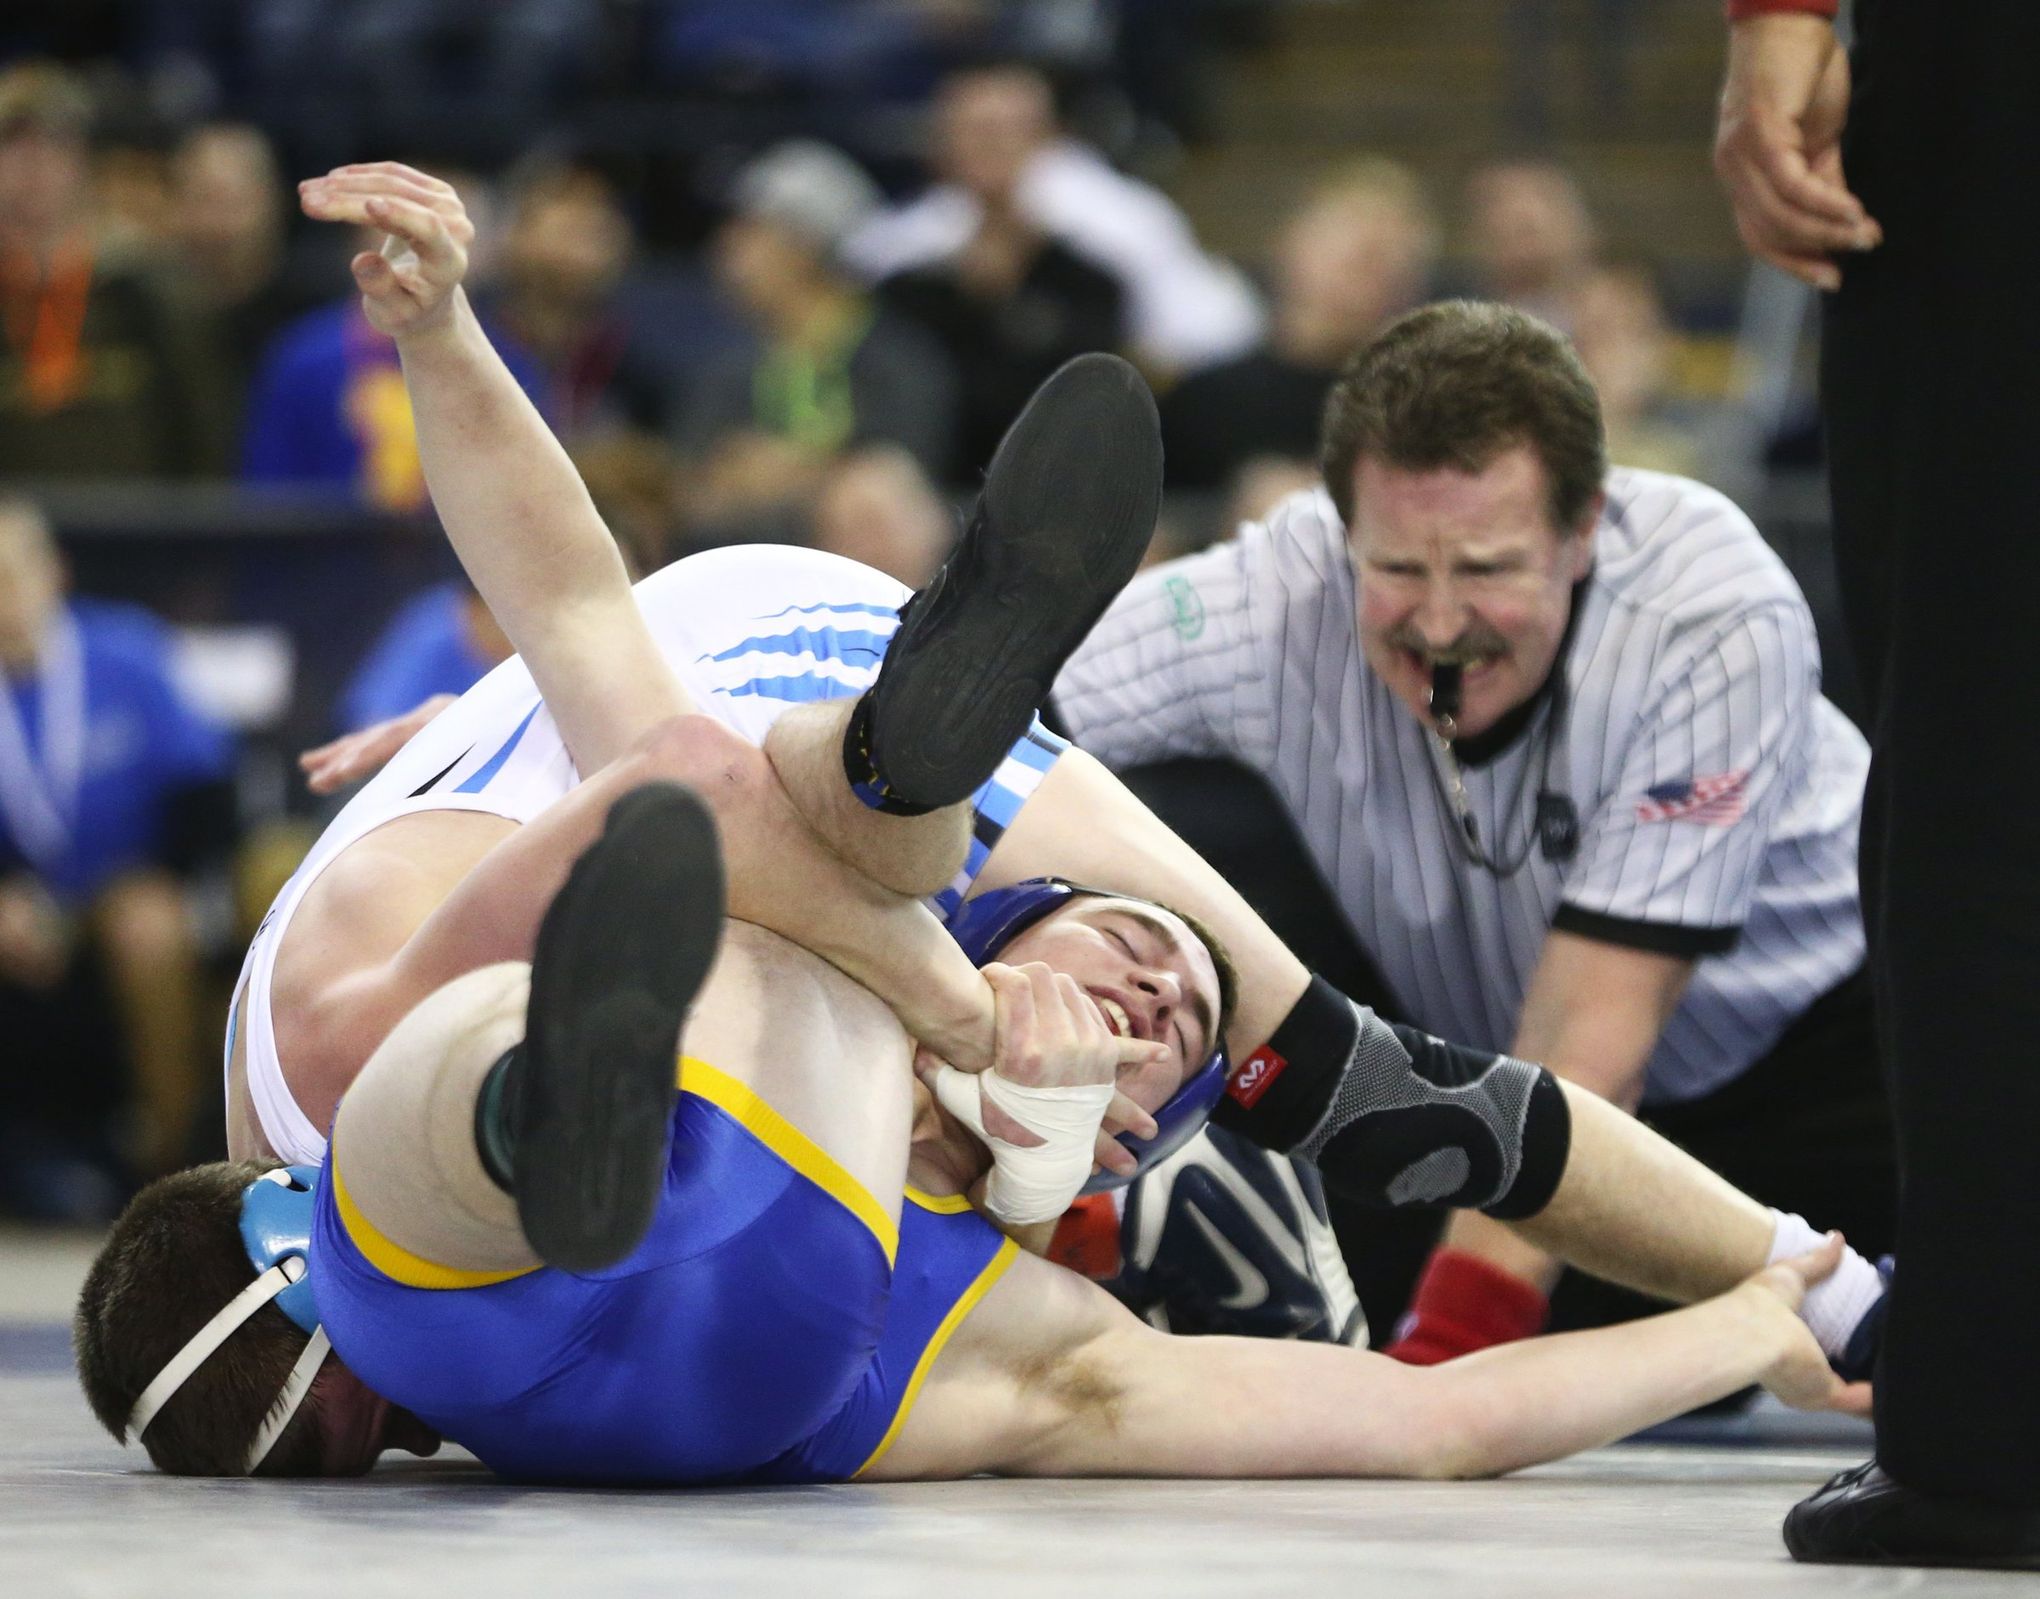 Wrestling Pins- add another one every time your little wrestler gets a pin